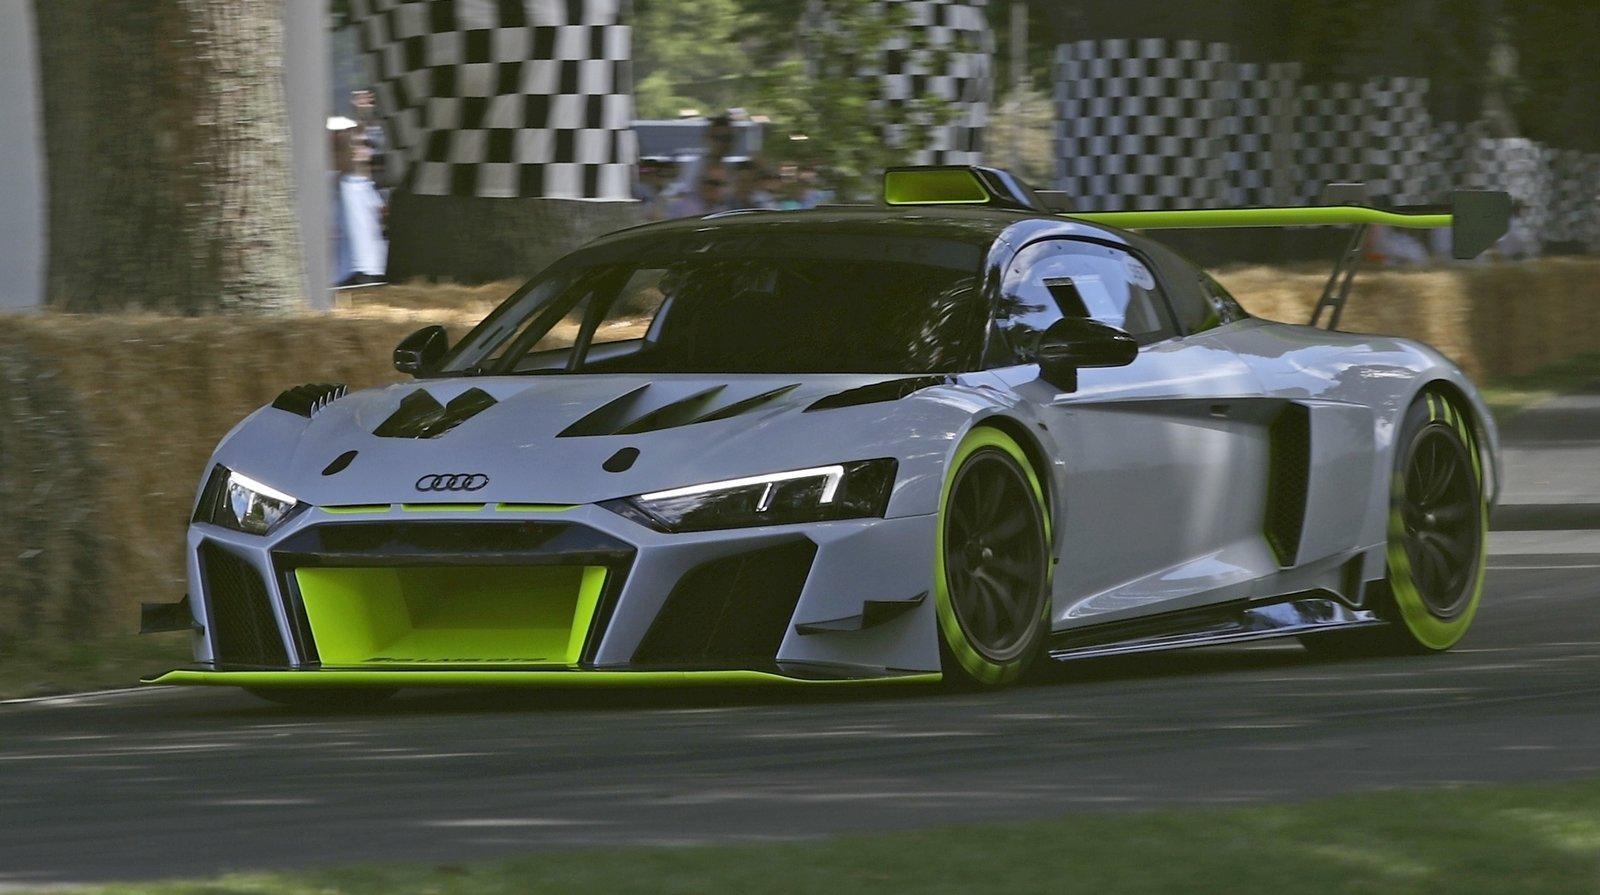 The 2020 Audi R8 LMS GT2 Is The R8 We Deserve For The Road But Can